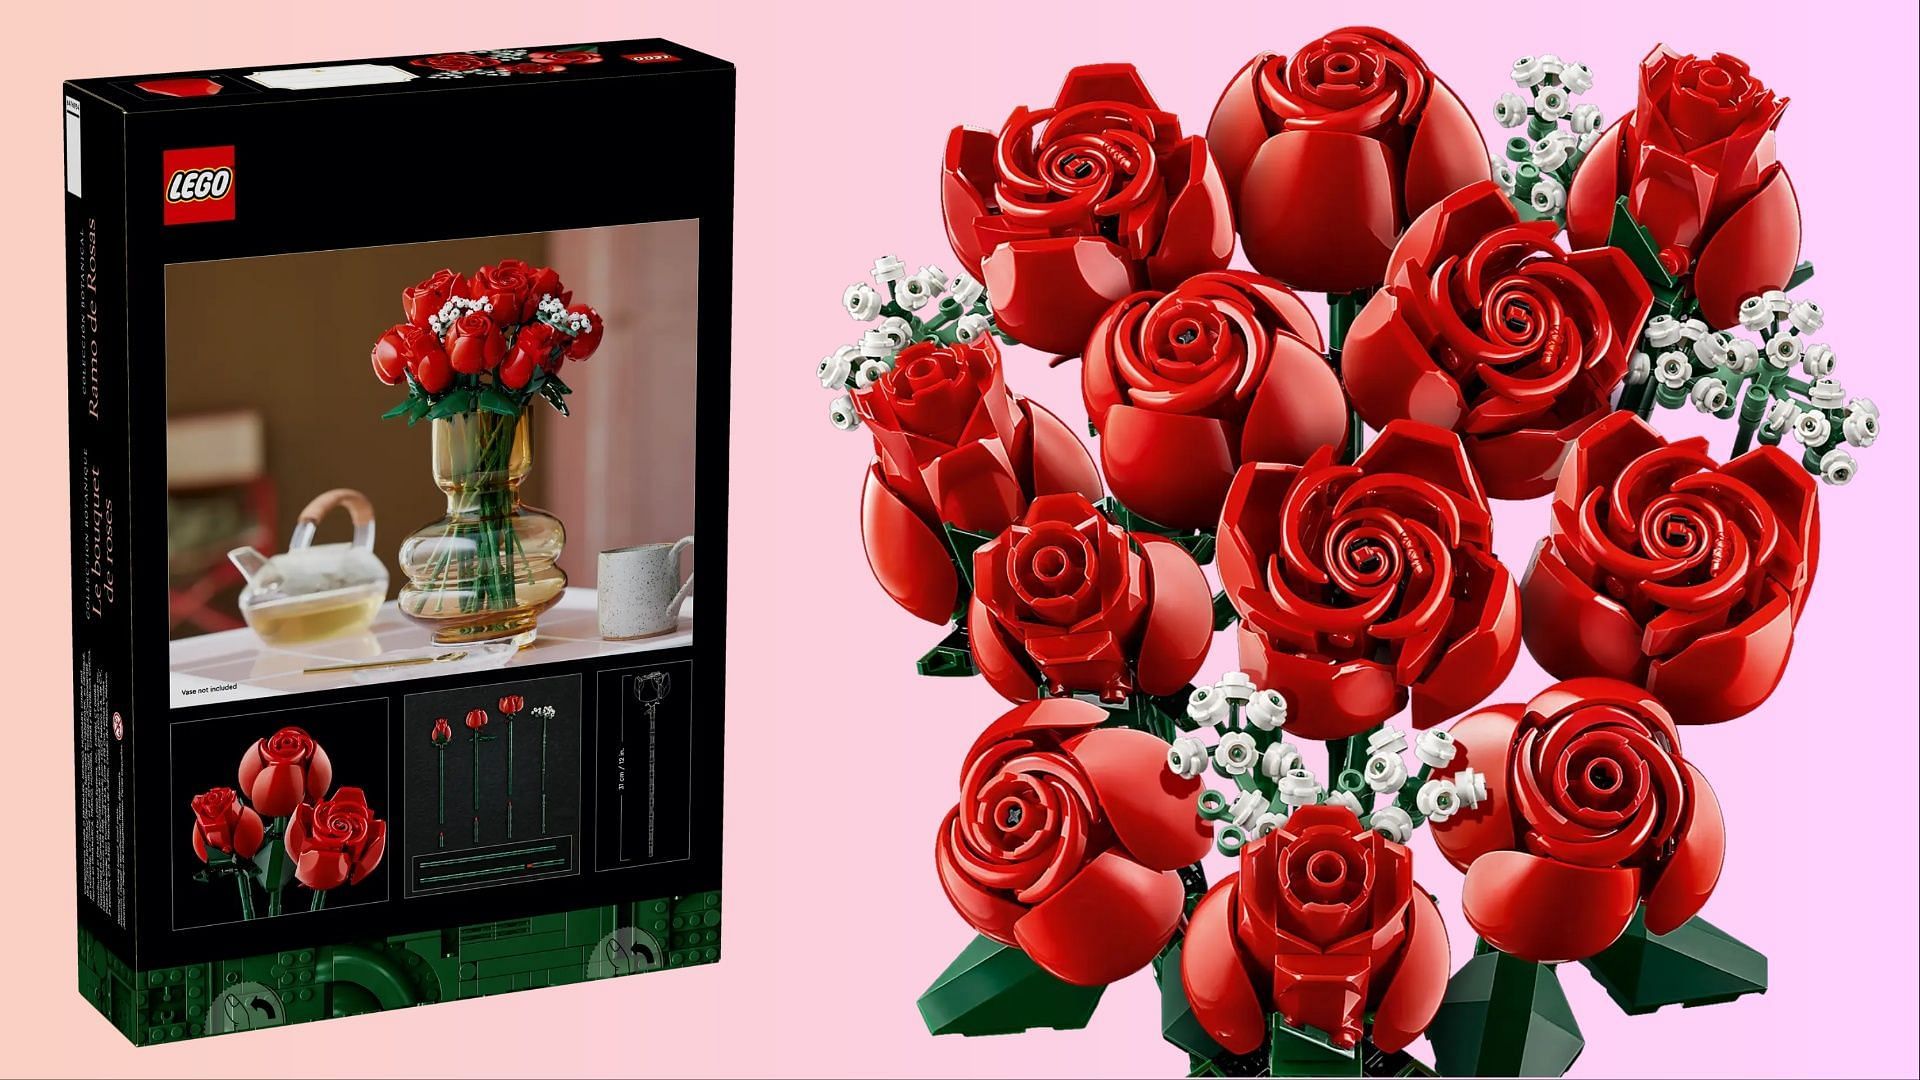 LEGO Is Releasing a Bouquet of Roses Set Just In Time for Valentine's Day